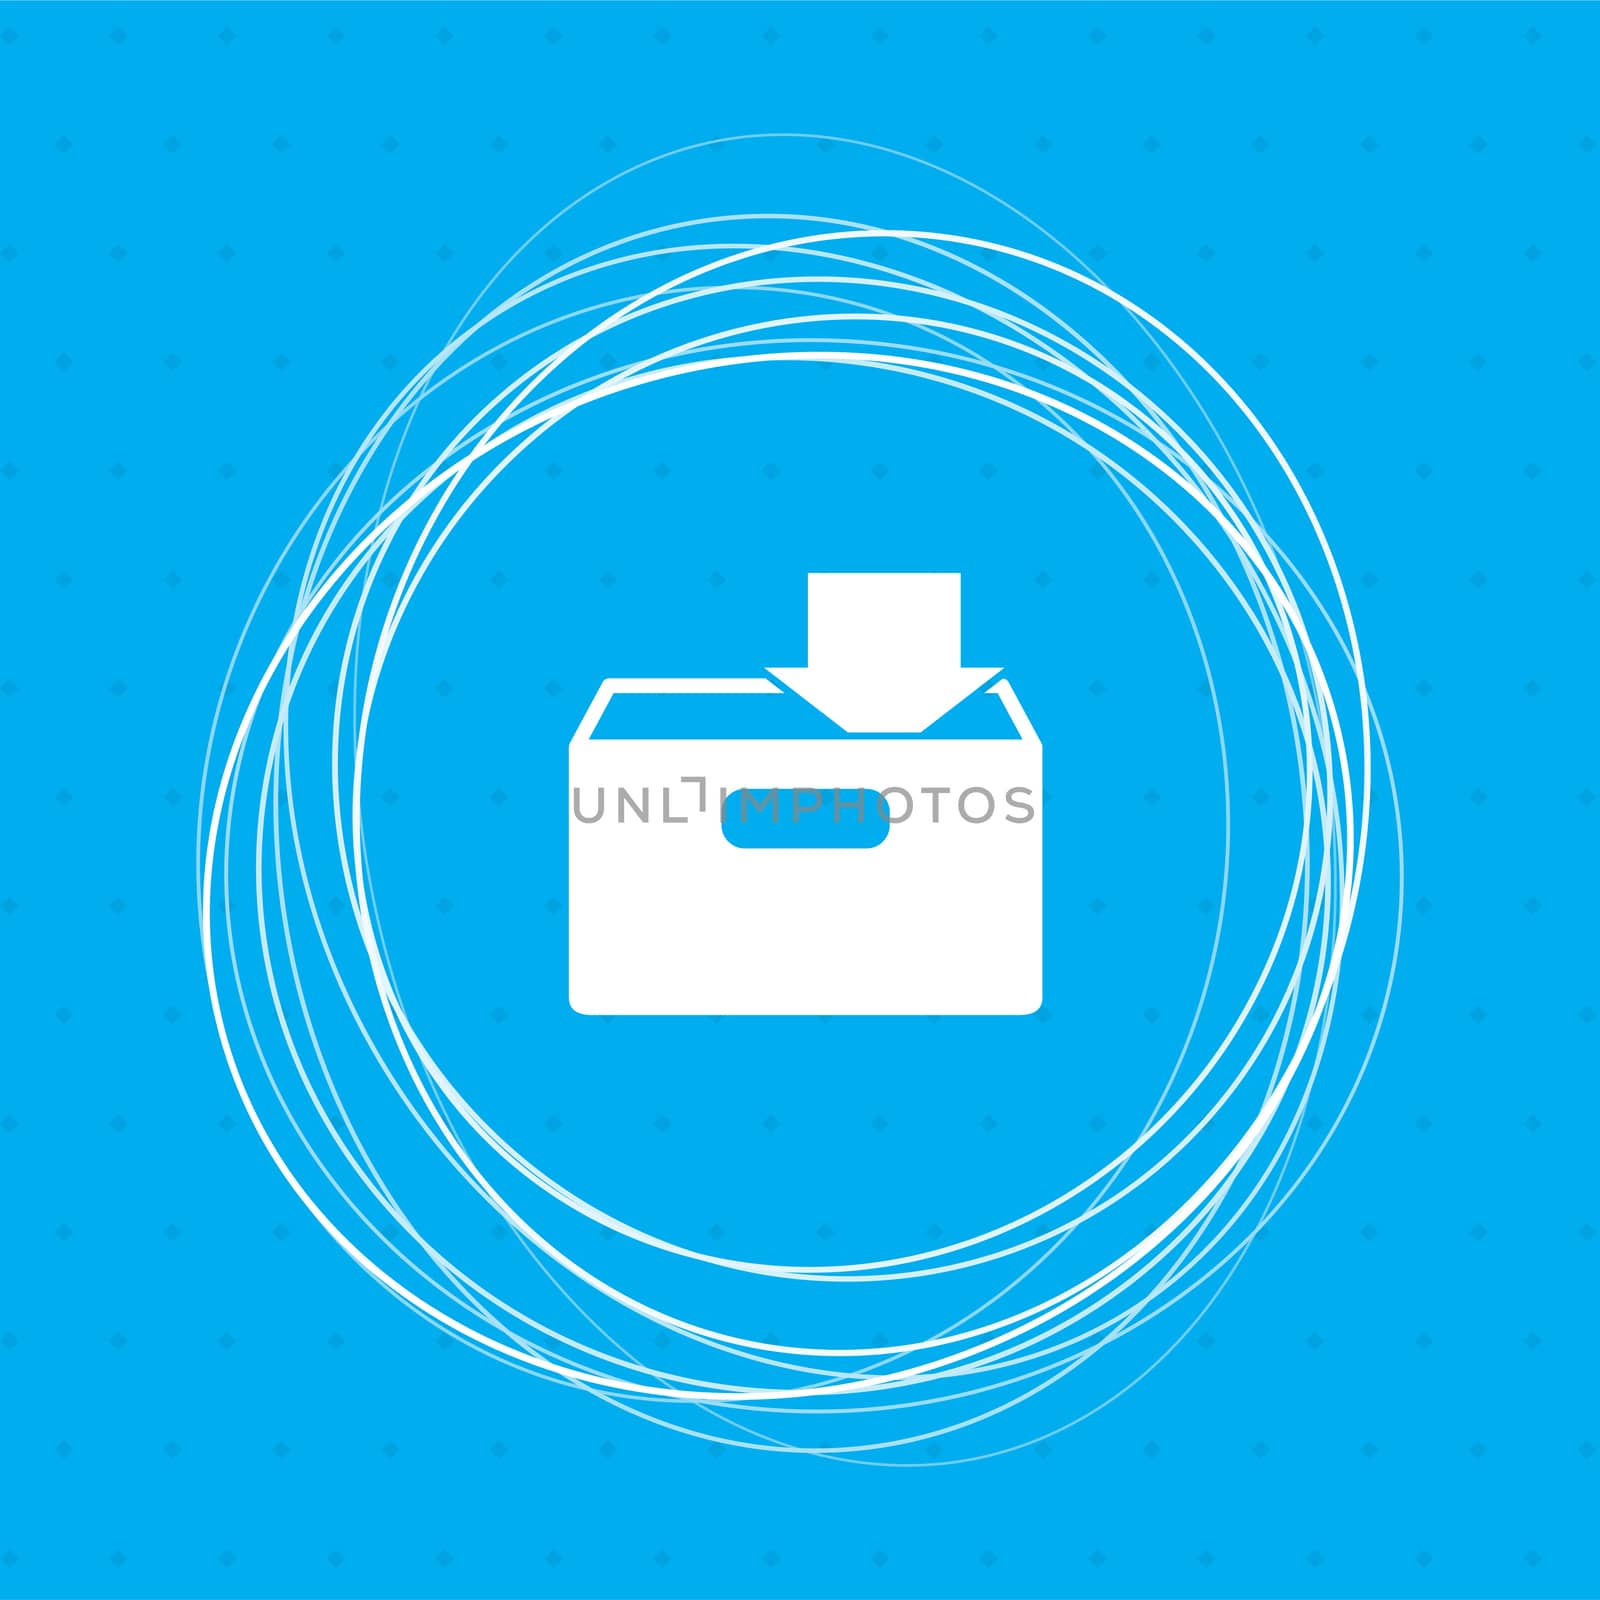 download to hdd icon on a blue background with abstract circles around and place for your text. illustration